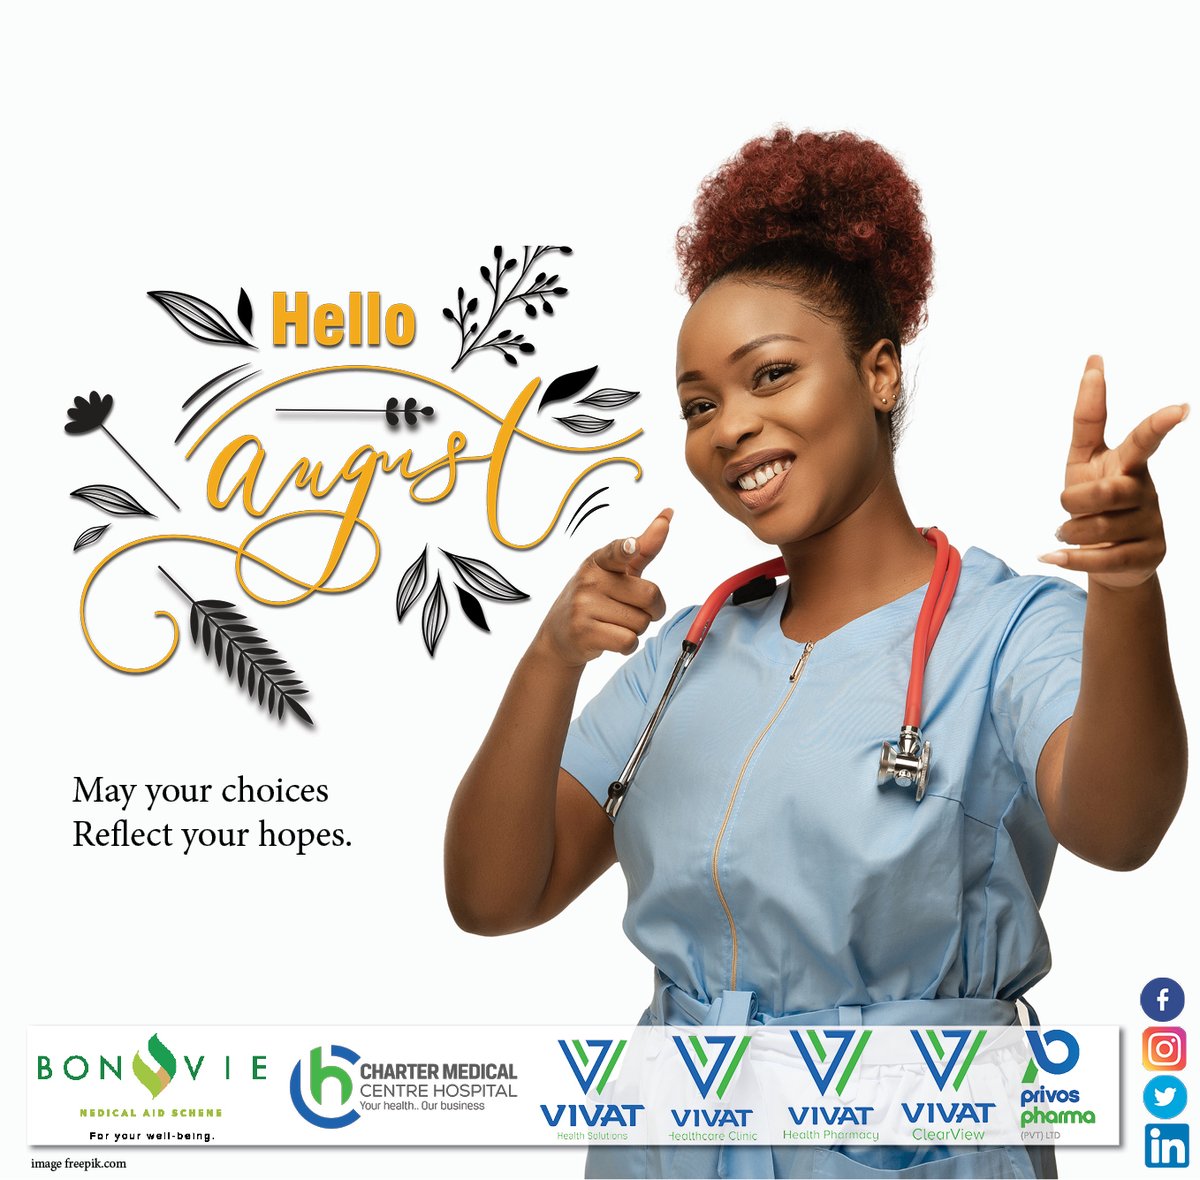 #August2023 #happynewmonth May your choices reflect your hopes. 

Thank you for choosing us as your health partner. 

#SwitchToBonVie #thegoodlife
#QualityHealthcareRedefined
#SeeTheWorldBetter 
 #yourhealth #ourbusiness